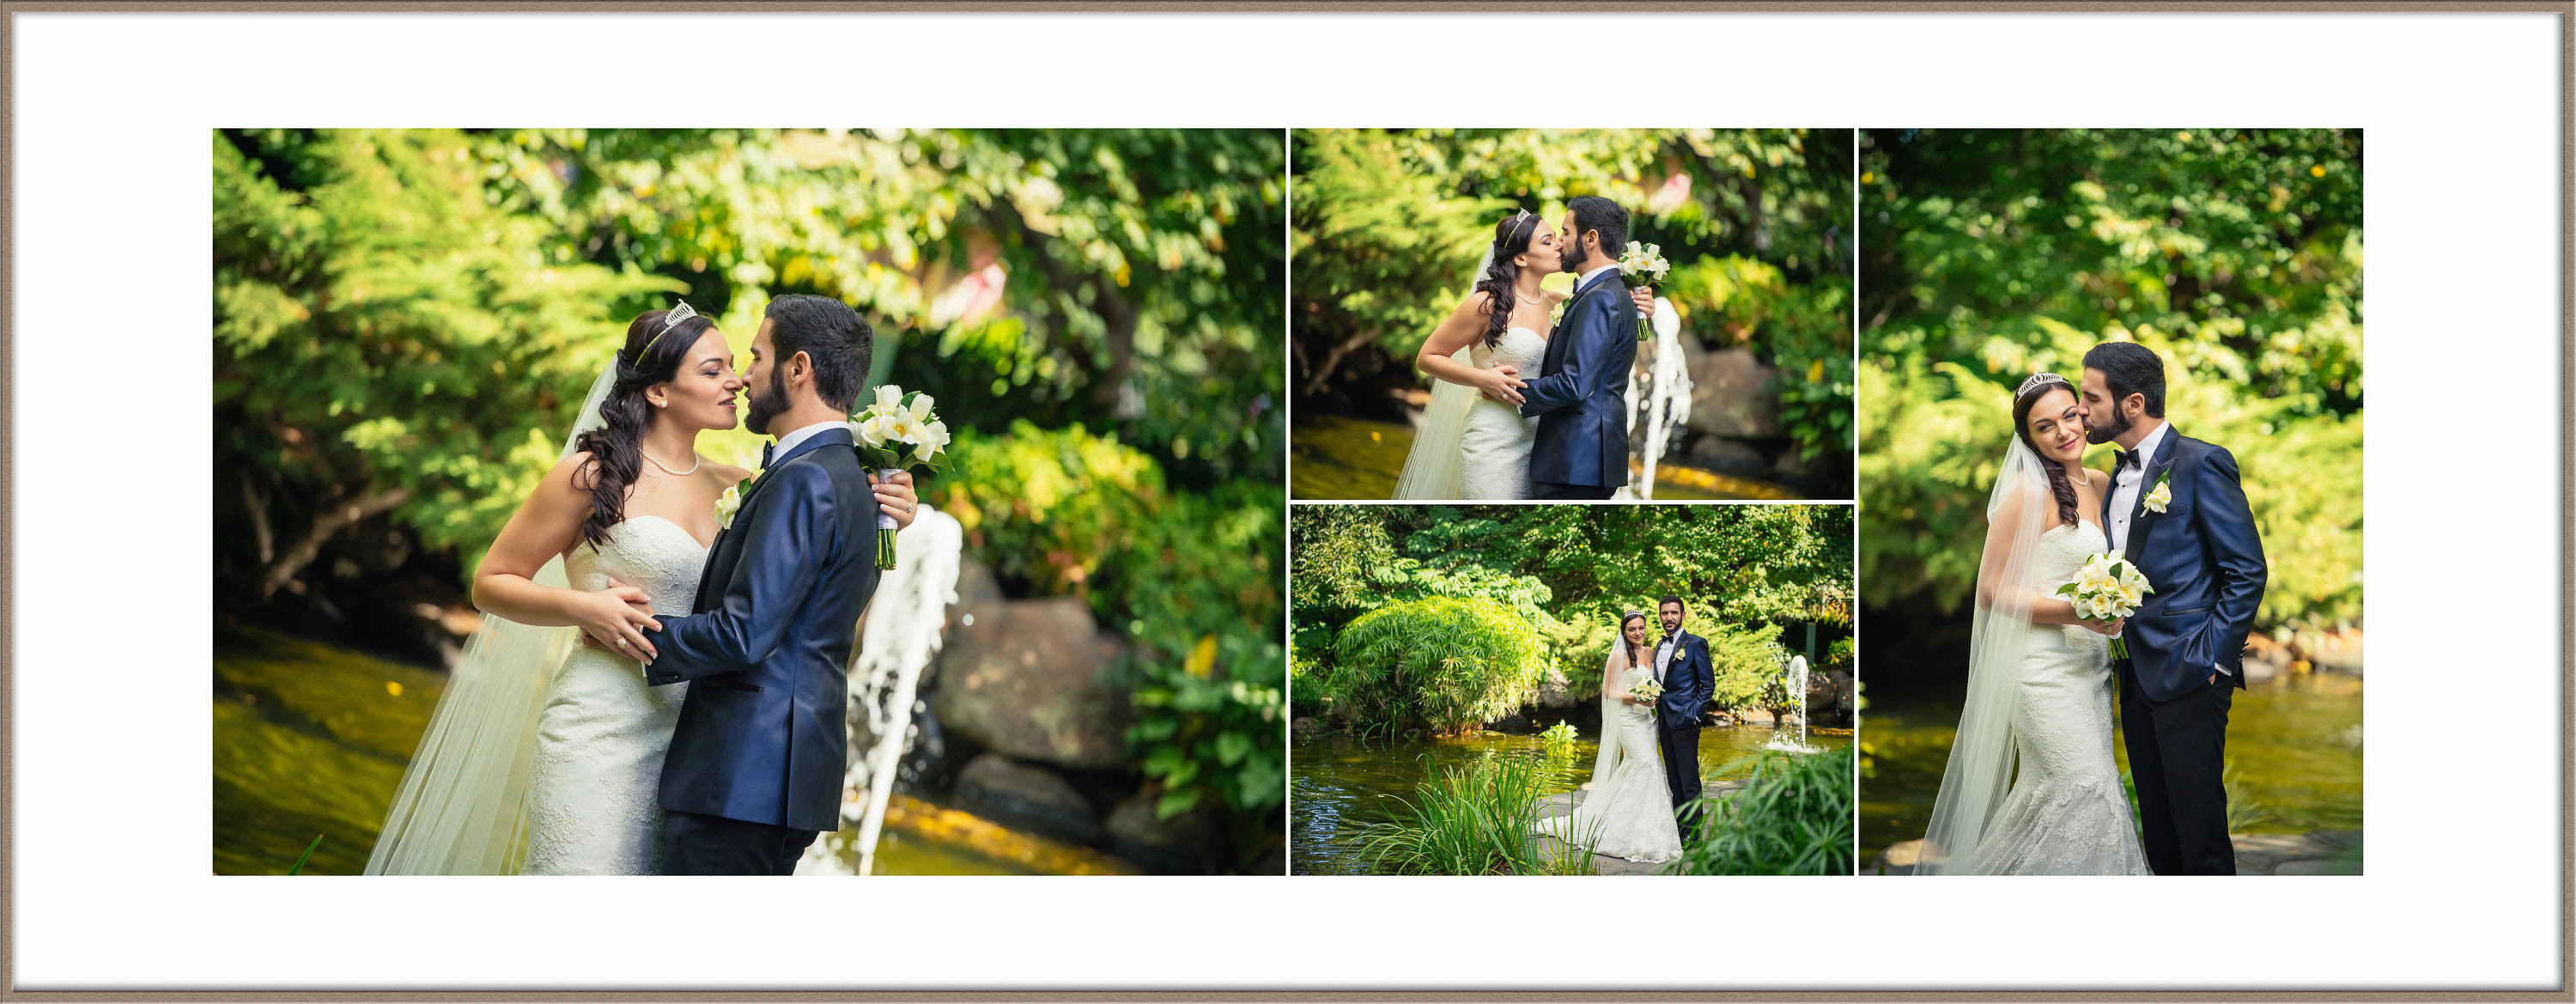 Moe_and_Margarert Firzory Garden Melbourne Wedding photography Blessed Vision (1 of 1)